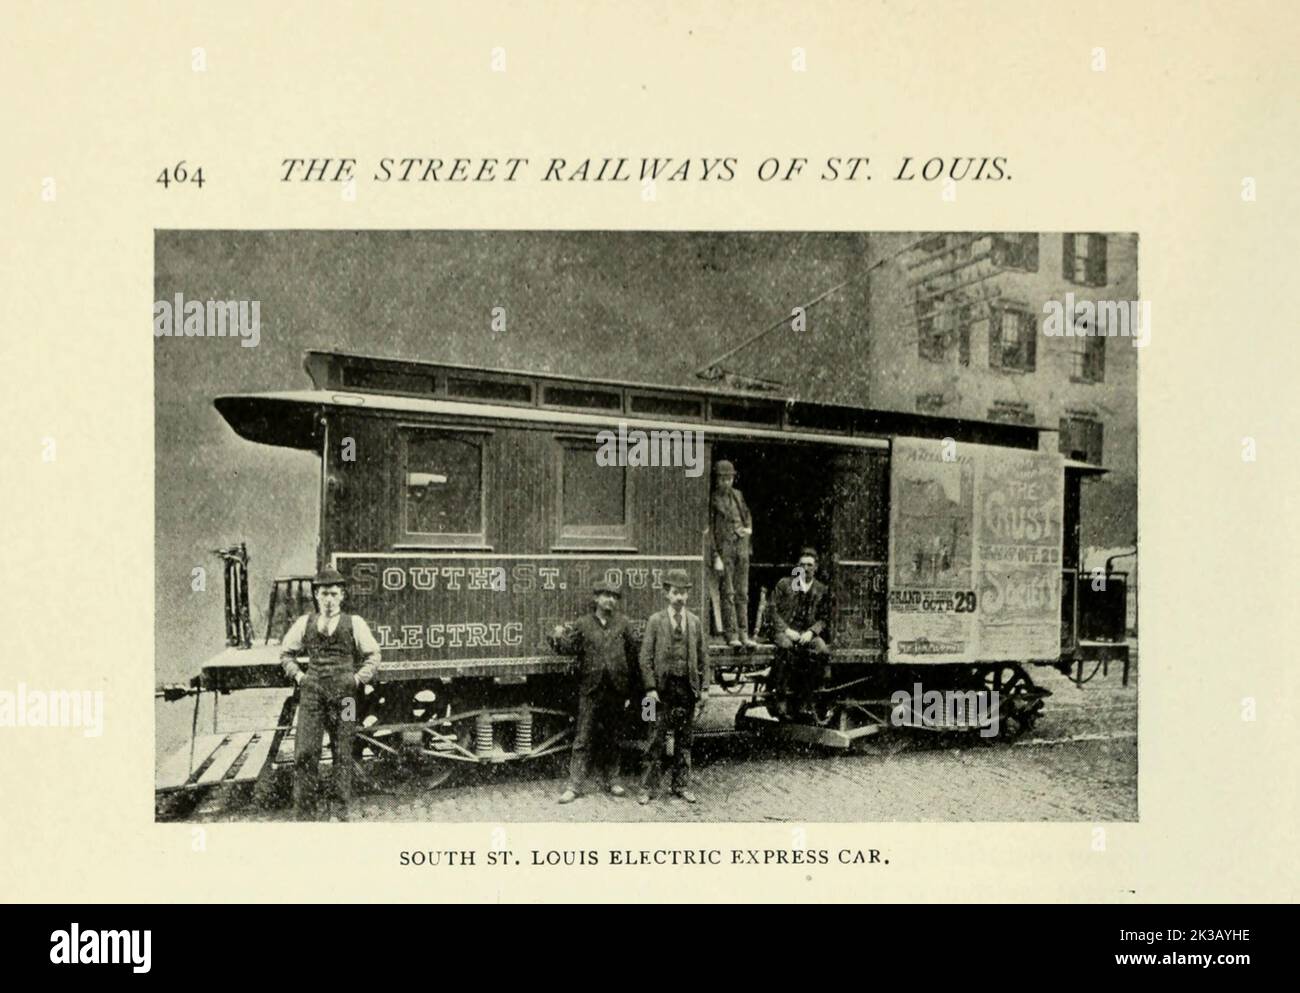 SOUTH ST. LOUIS ELECTRIC EXPRESS CAR from the Article THE STREET RAILWAYS OF ST. LOUIS, Missouri By William H. Bryan, M. E. from The Engineering Magazine DEVOTED TO INDUSTRIAL PROGRESS Volume VIII April to September, 1895 NEW YORK The Engineering Magazine Co Stock Photo